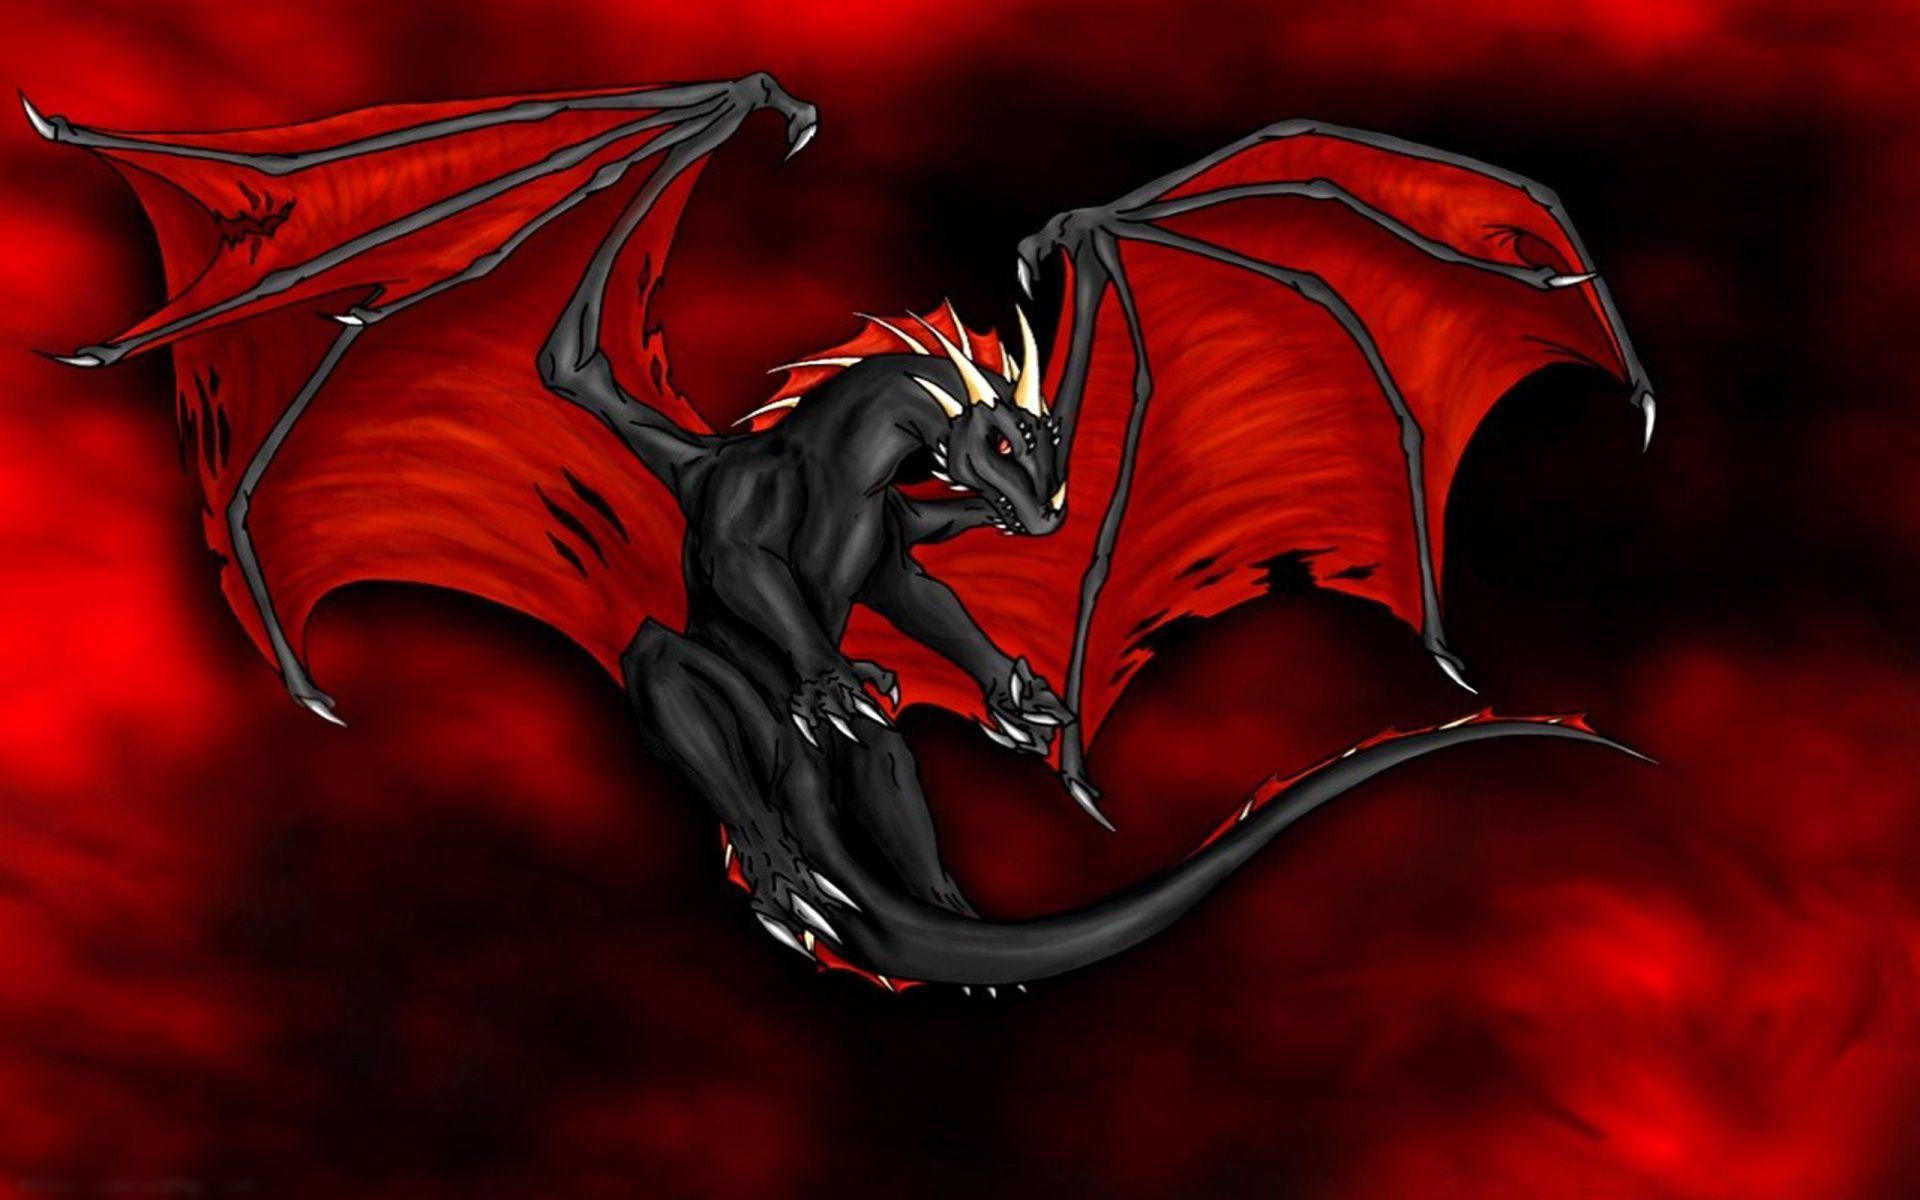 Red Dragon Wallpaper, 36 Red Dragon 2016 Wallpaper's Archive, Most